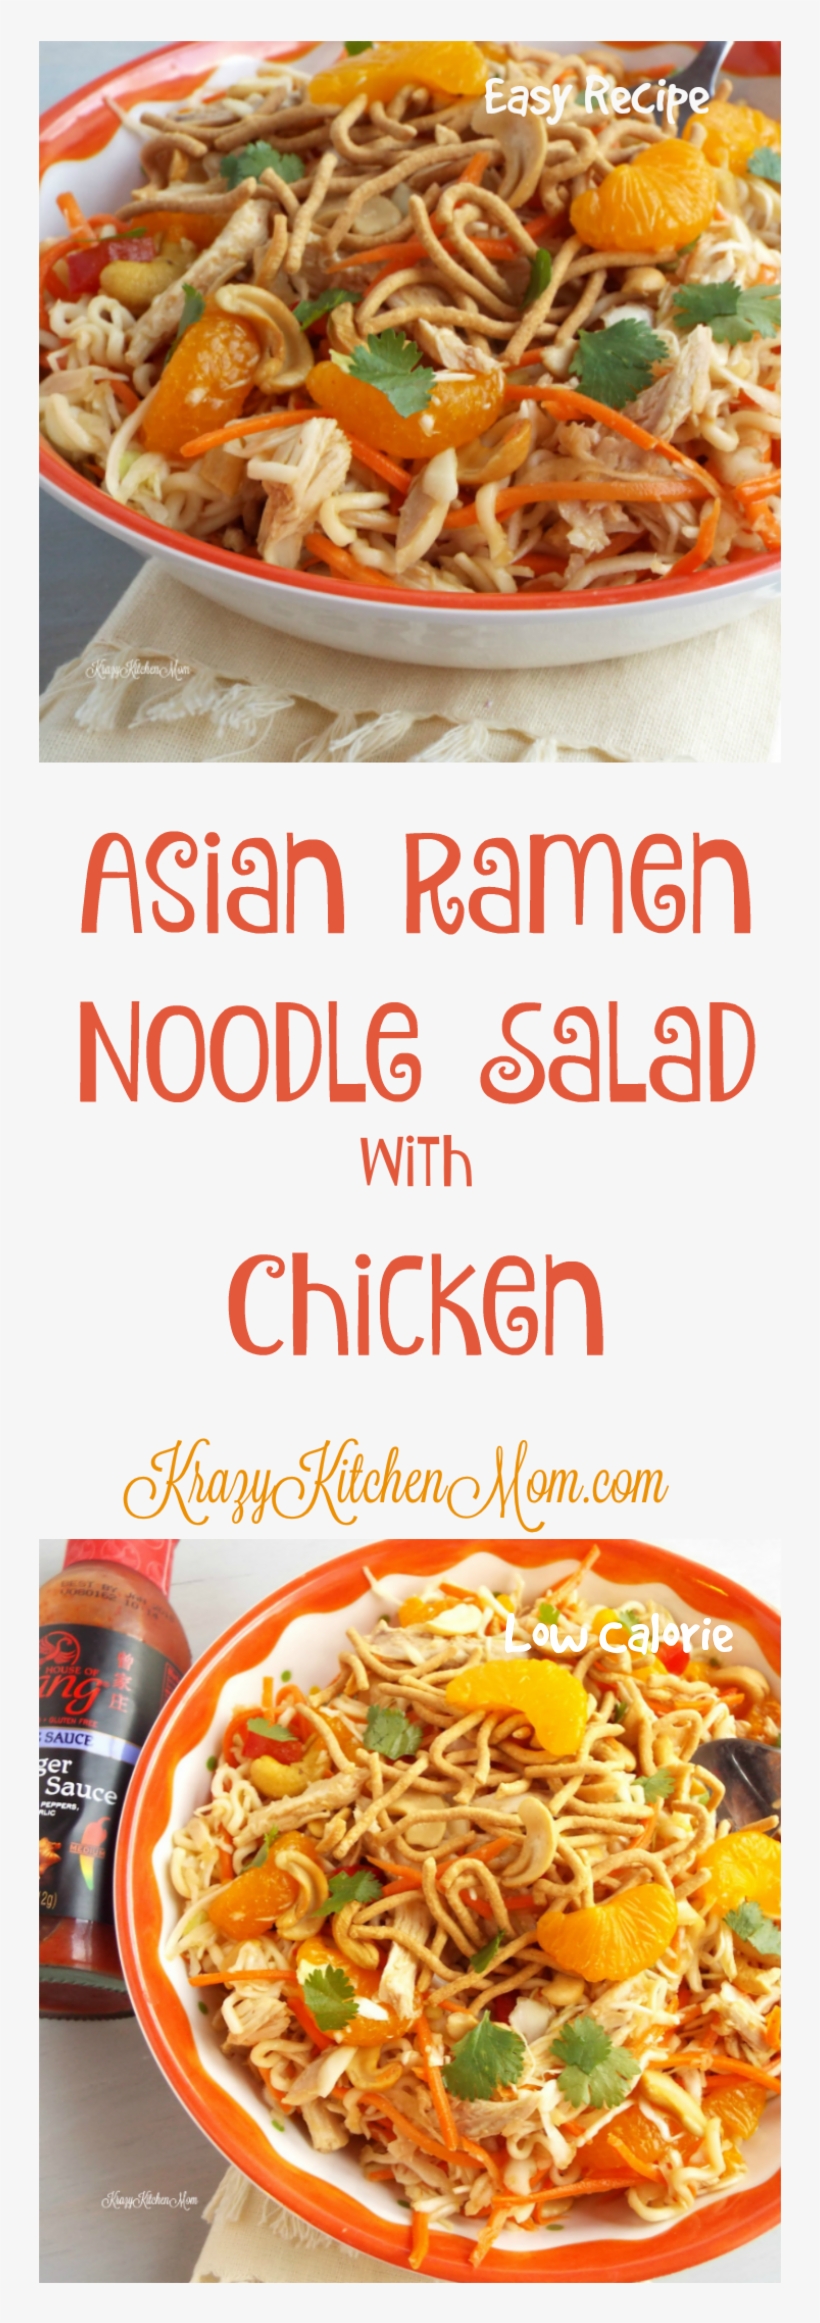 Asian Ramen Noodle Salad With Chicken, transparent png #6972085